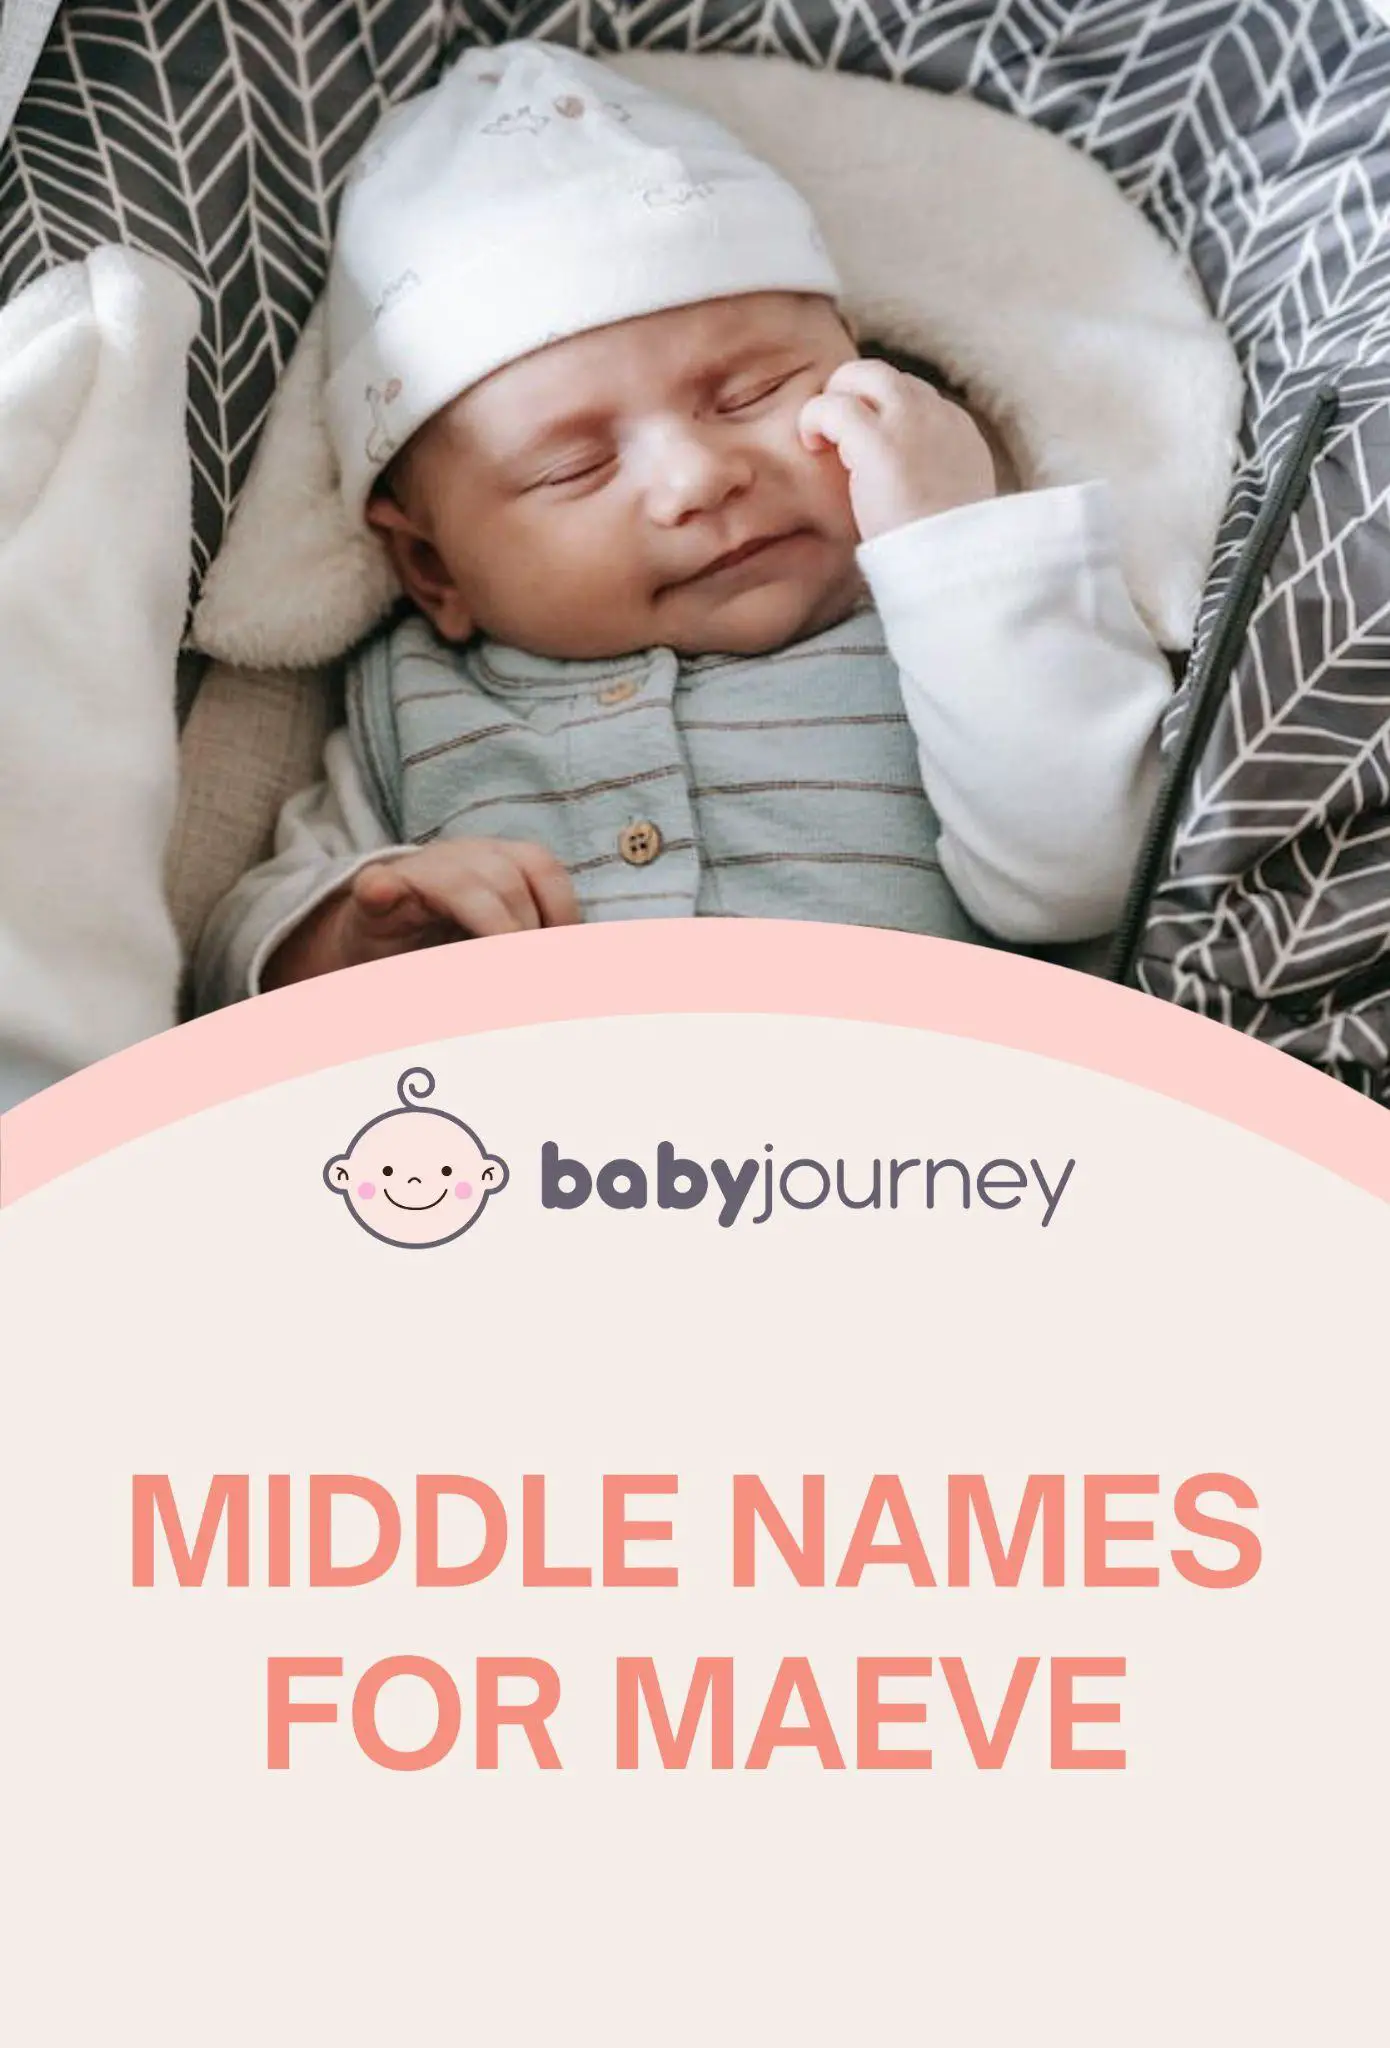 230+ middle names for Maeve - Baby Journey